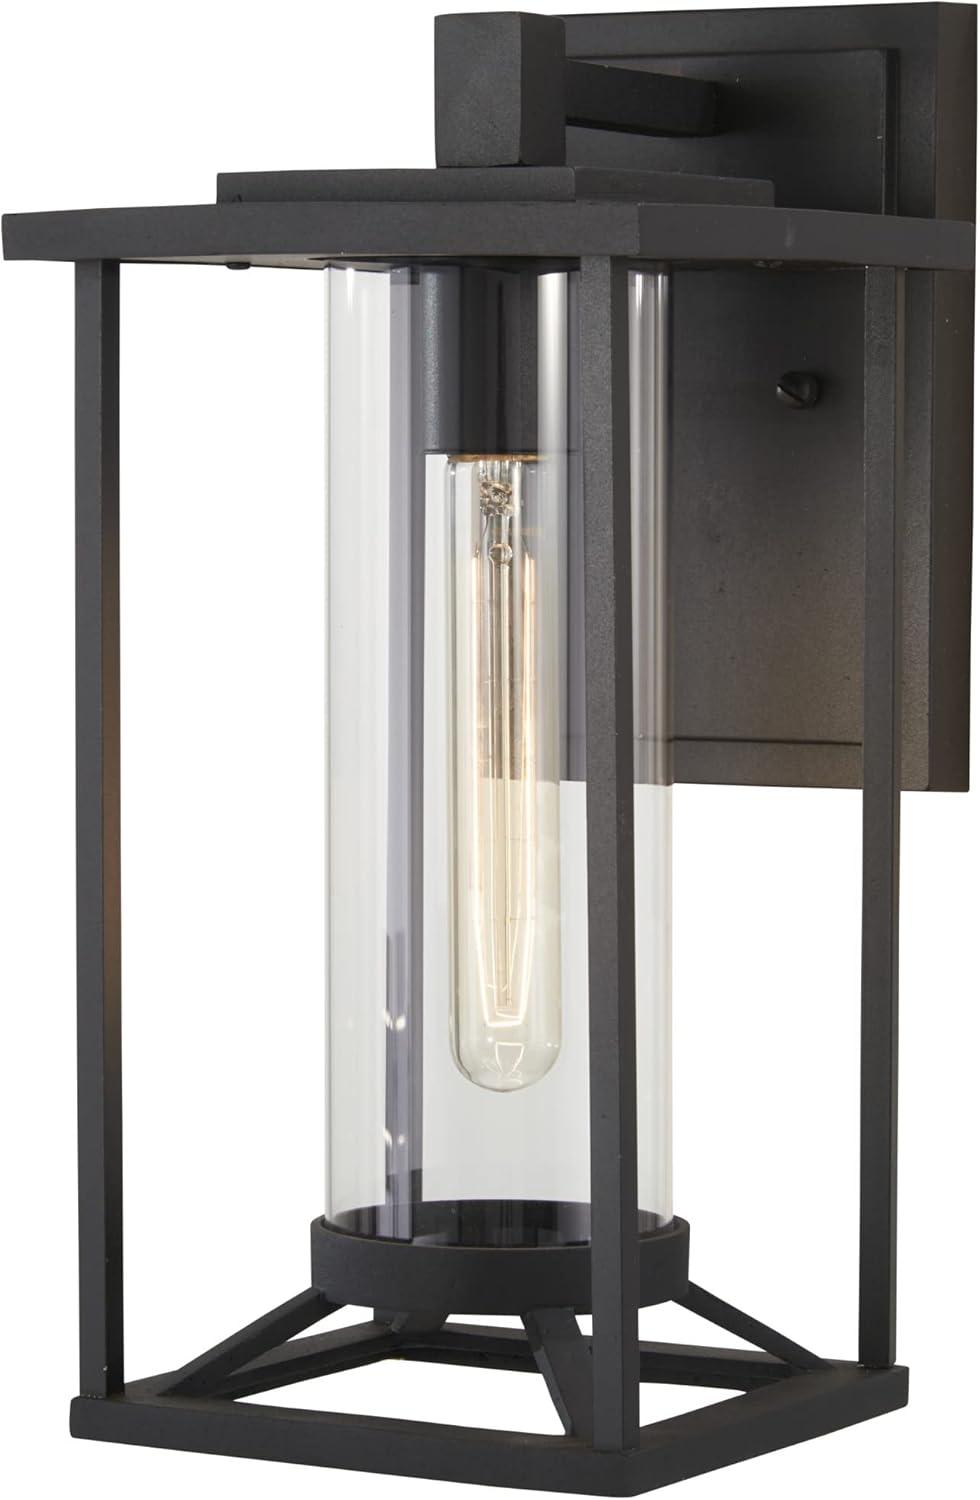 Trescott Contemporary Black Outdoor Wall Lantern with Clear Glass